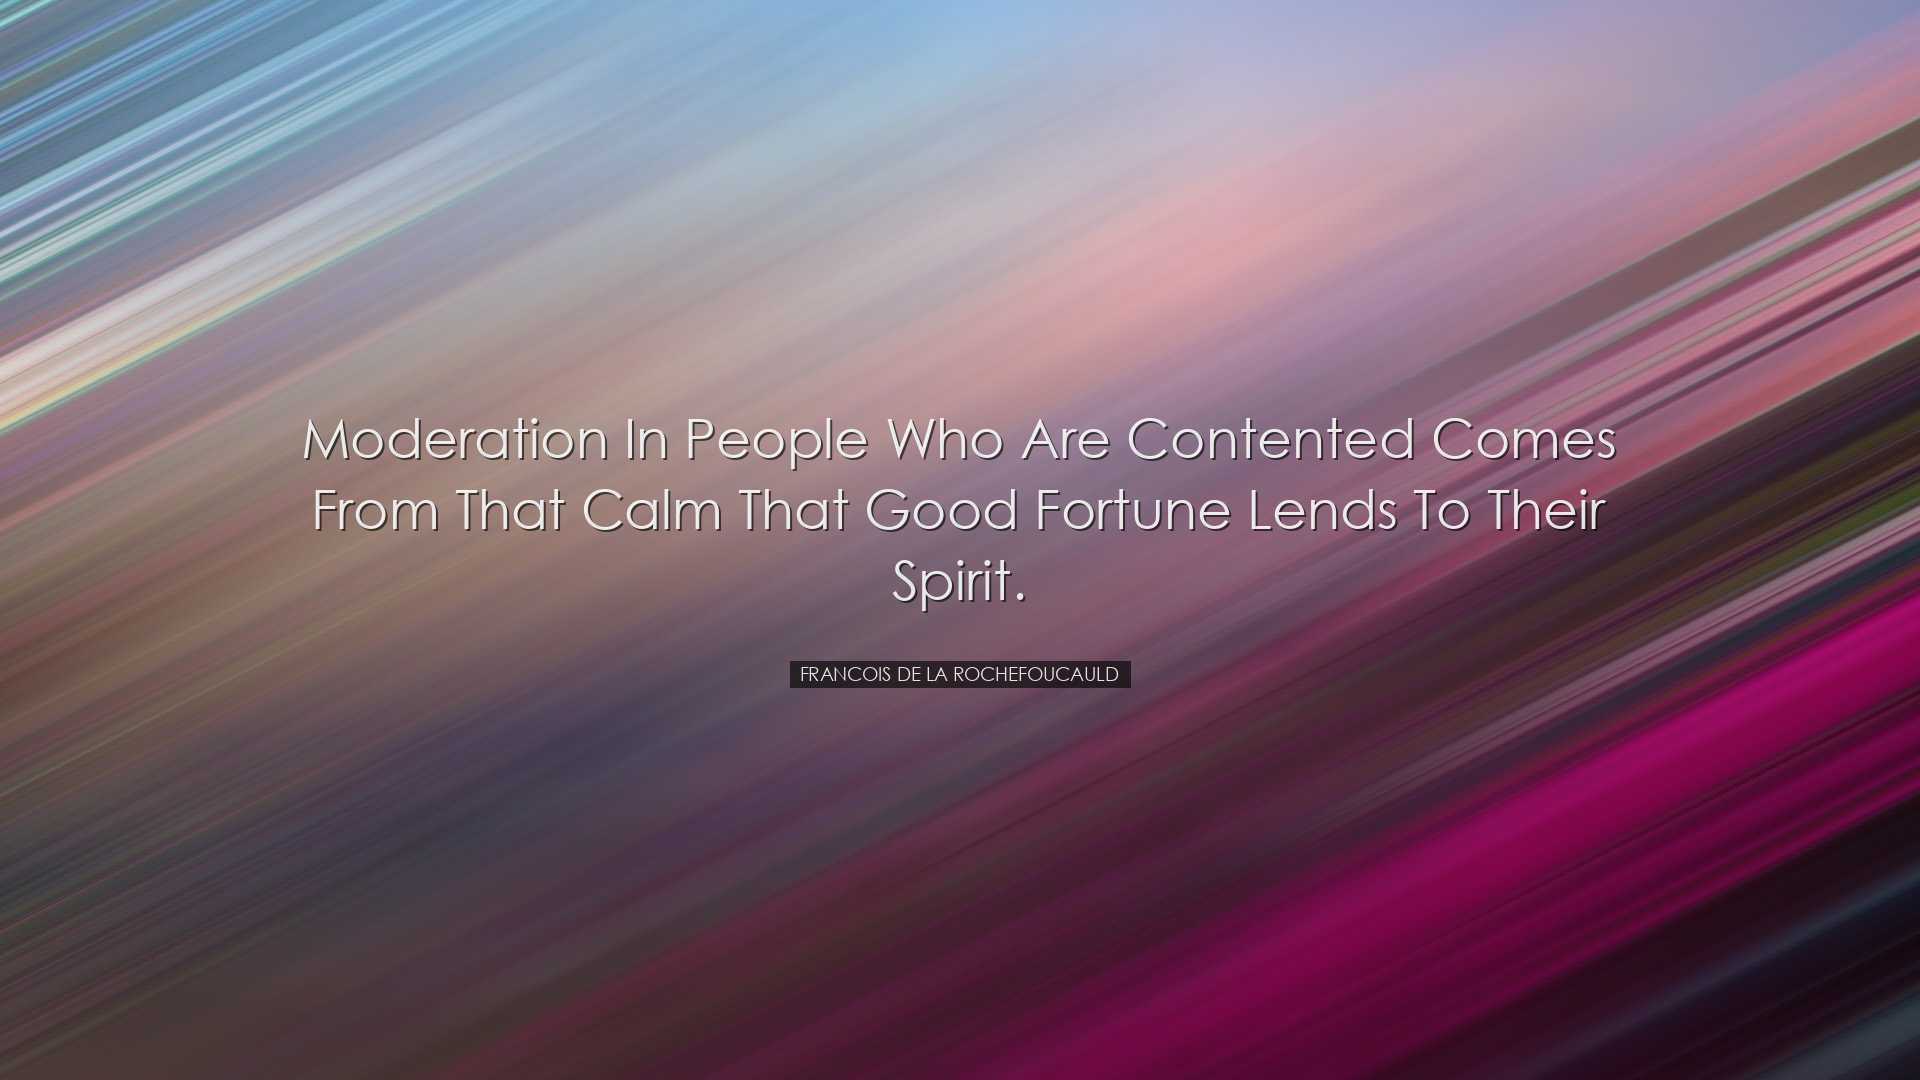 Moderation in people who are contented comes from that calm that g